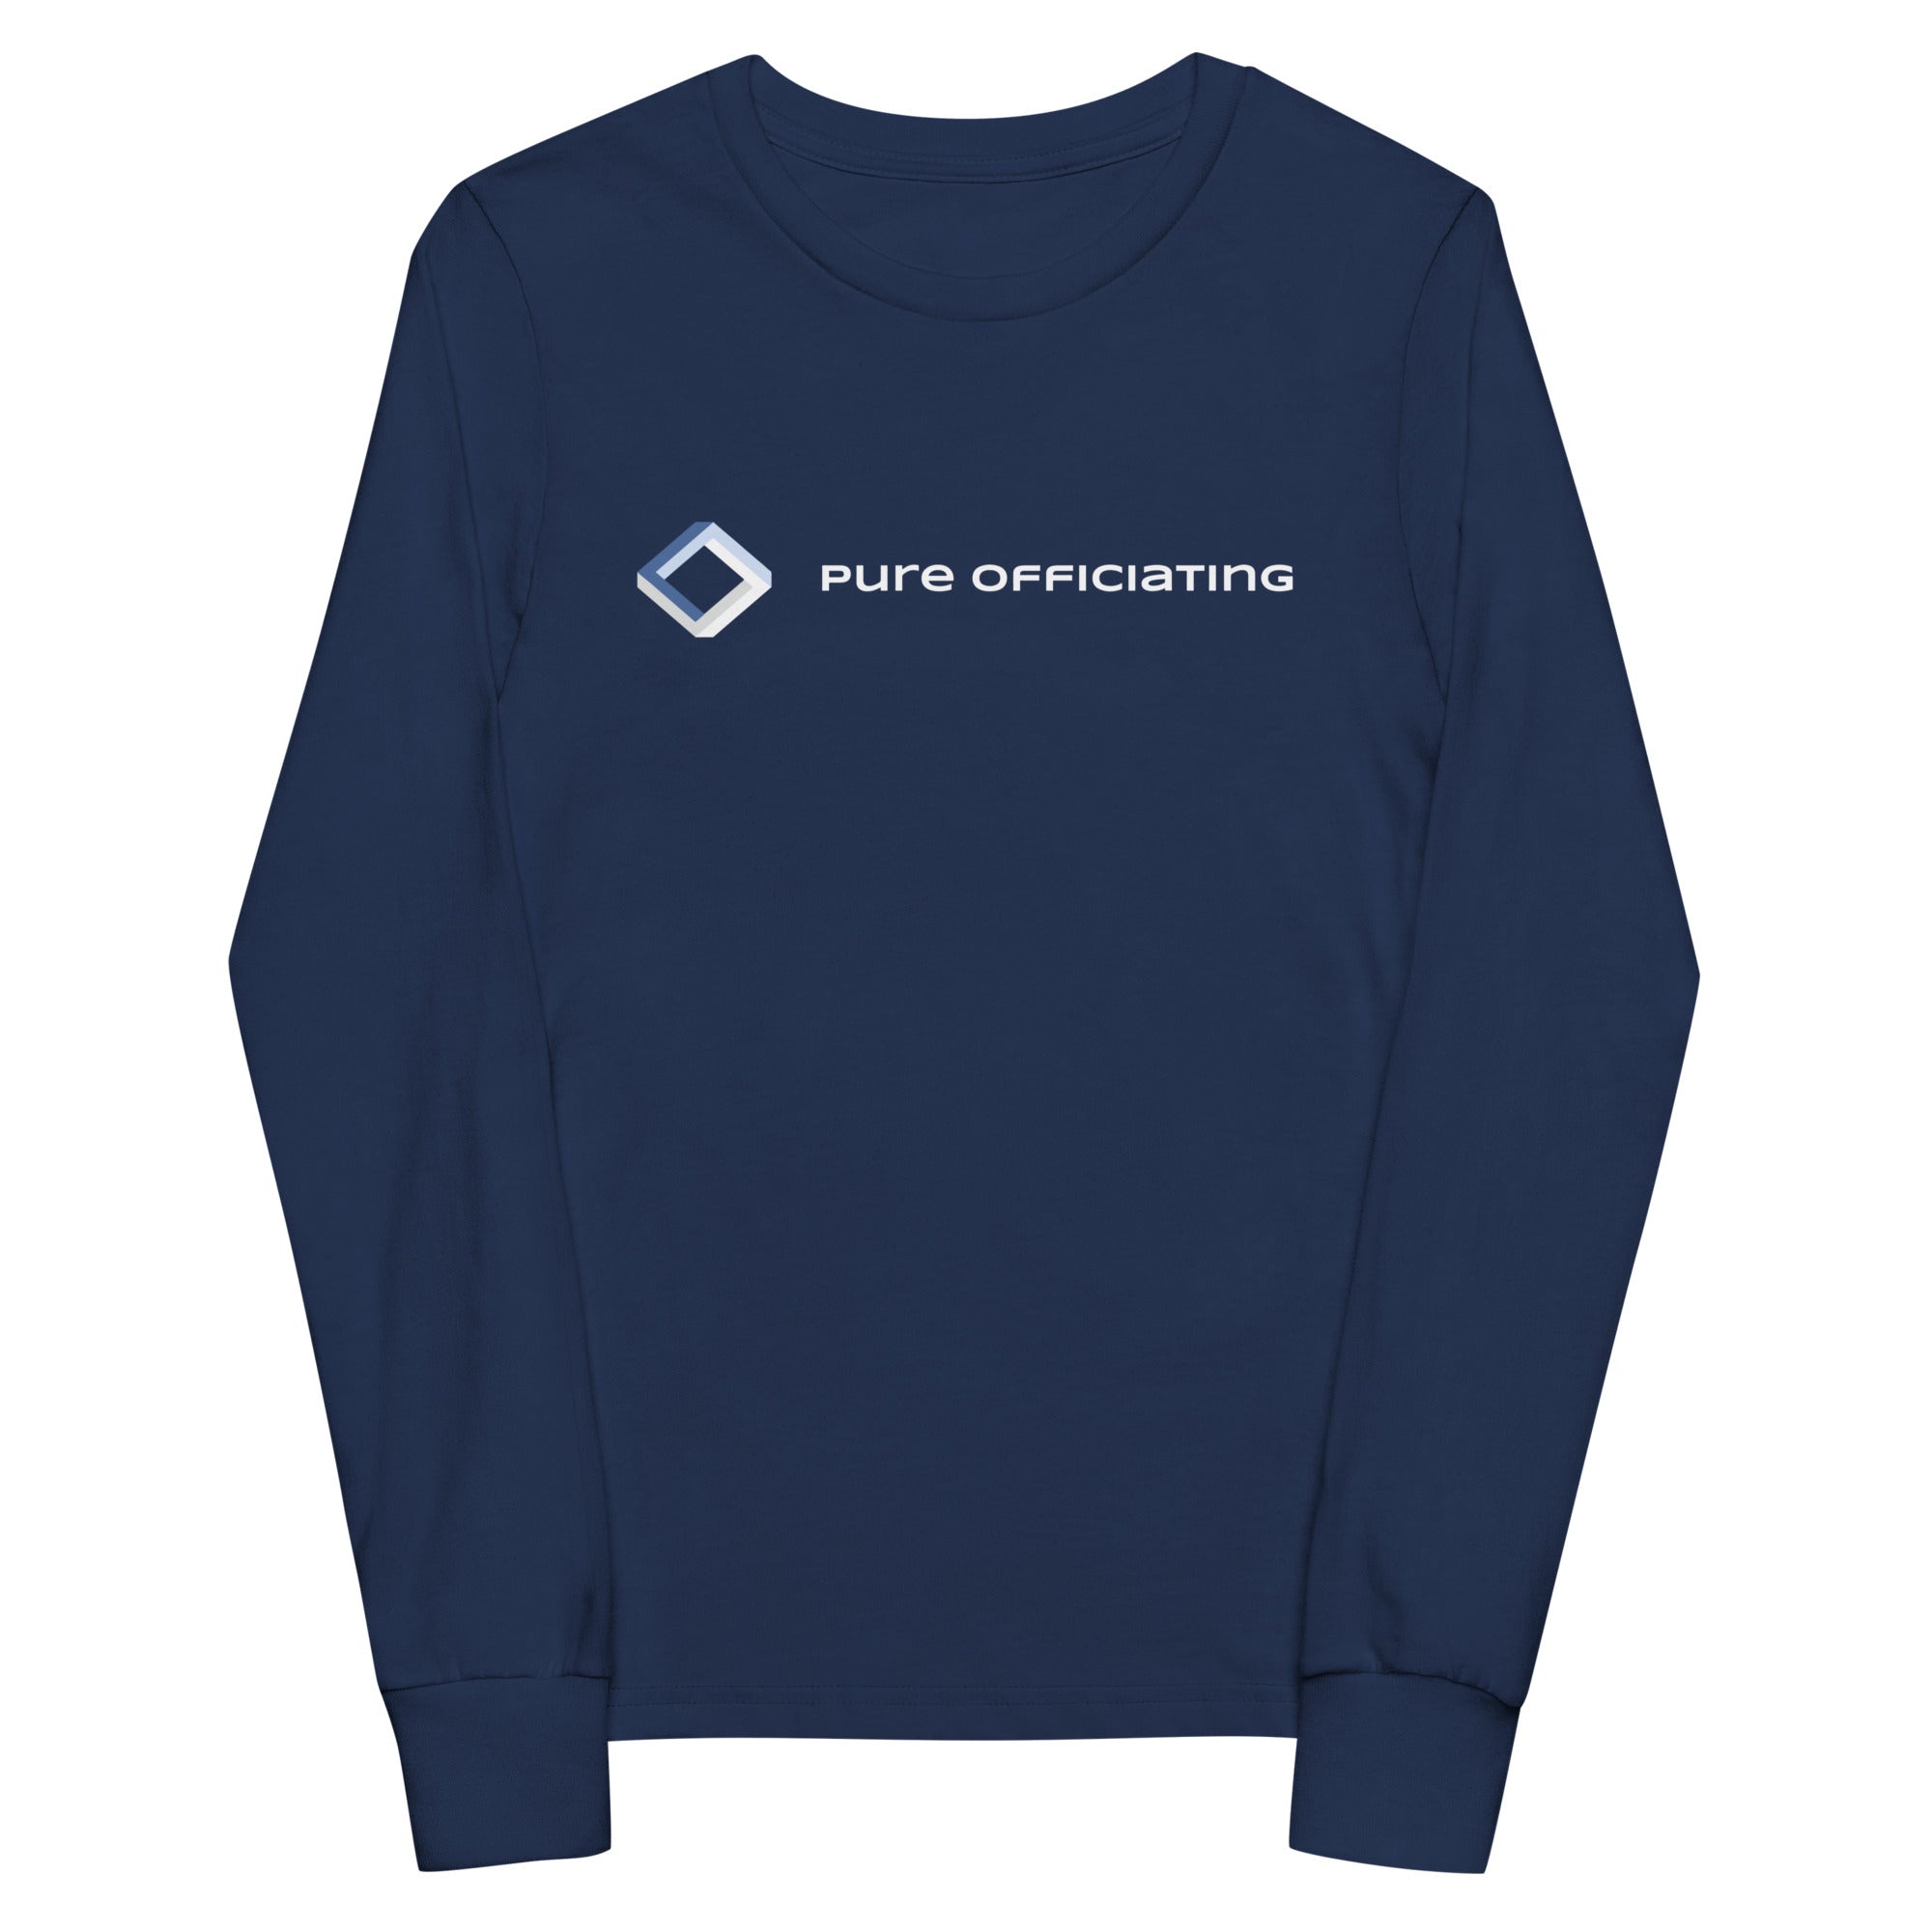 PURE OFFICIATING Youth long sleeve tee V2